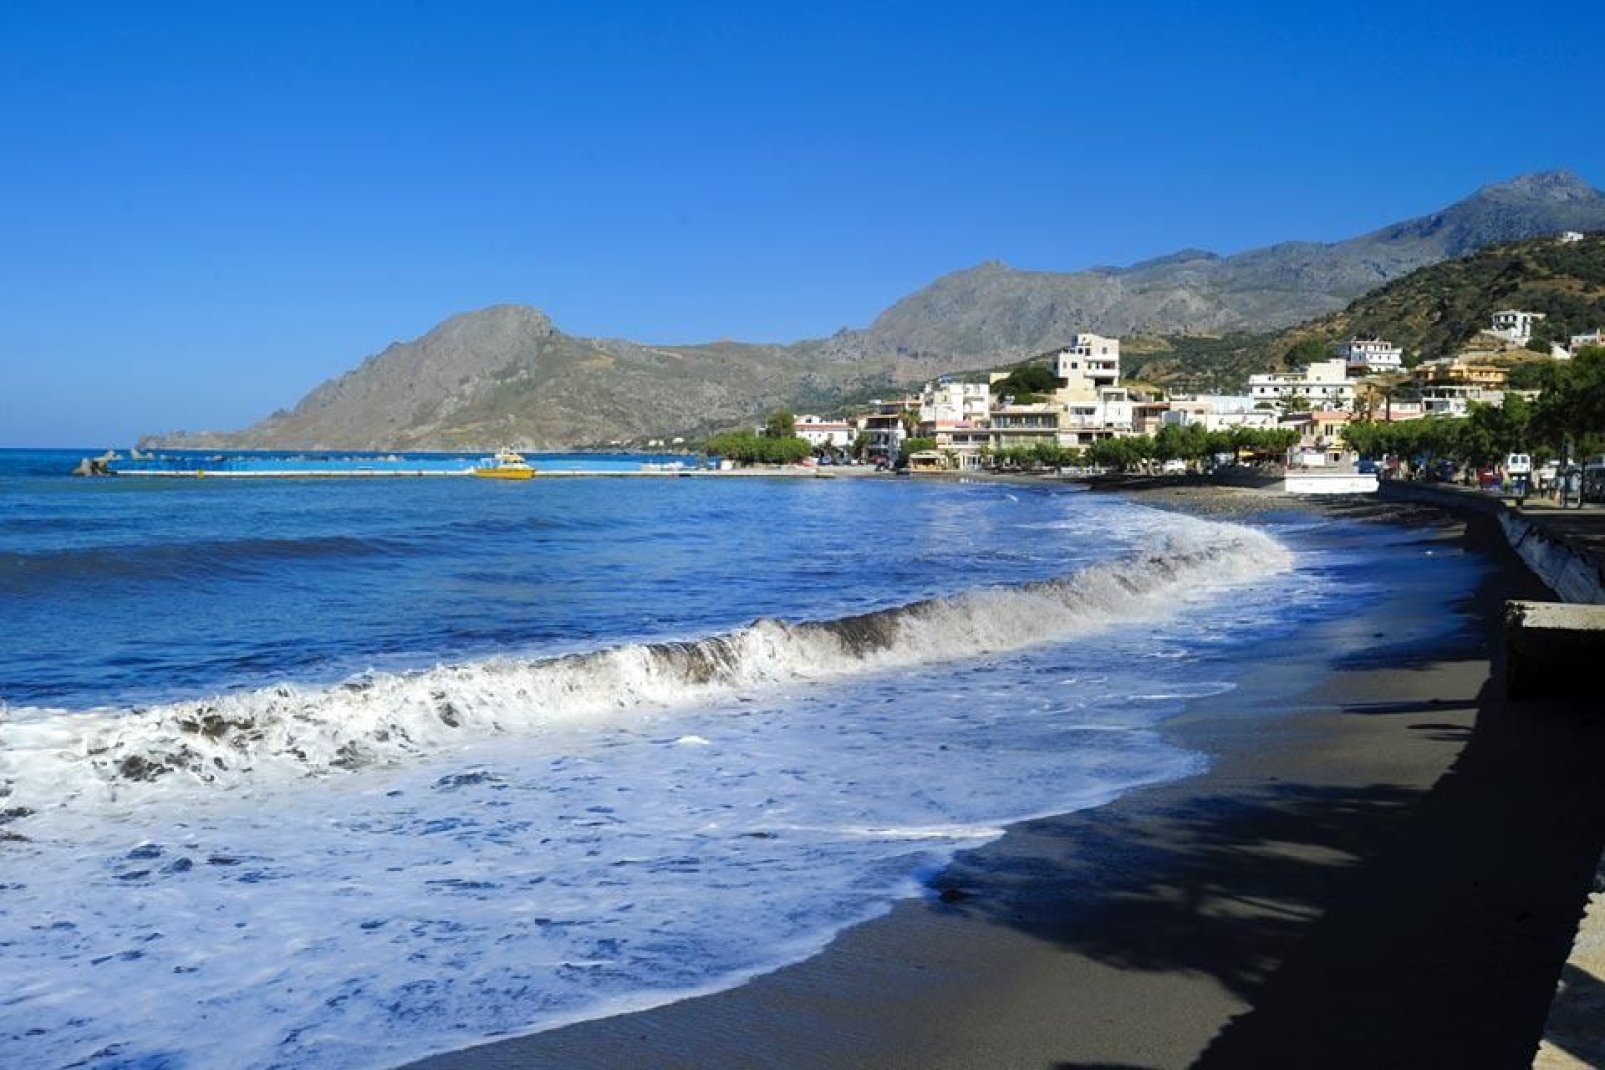 Because it is located in the very south of Europe, Plakias receives an incredible amount of sunshine.